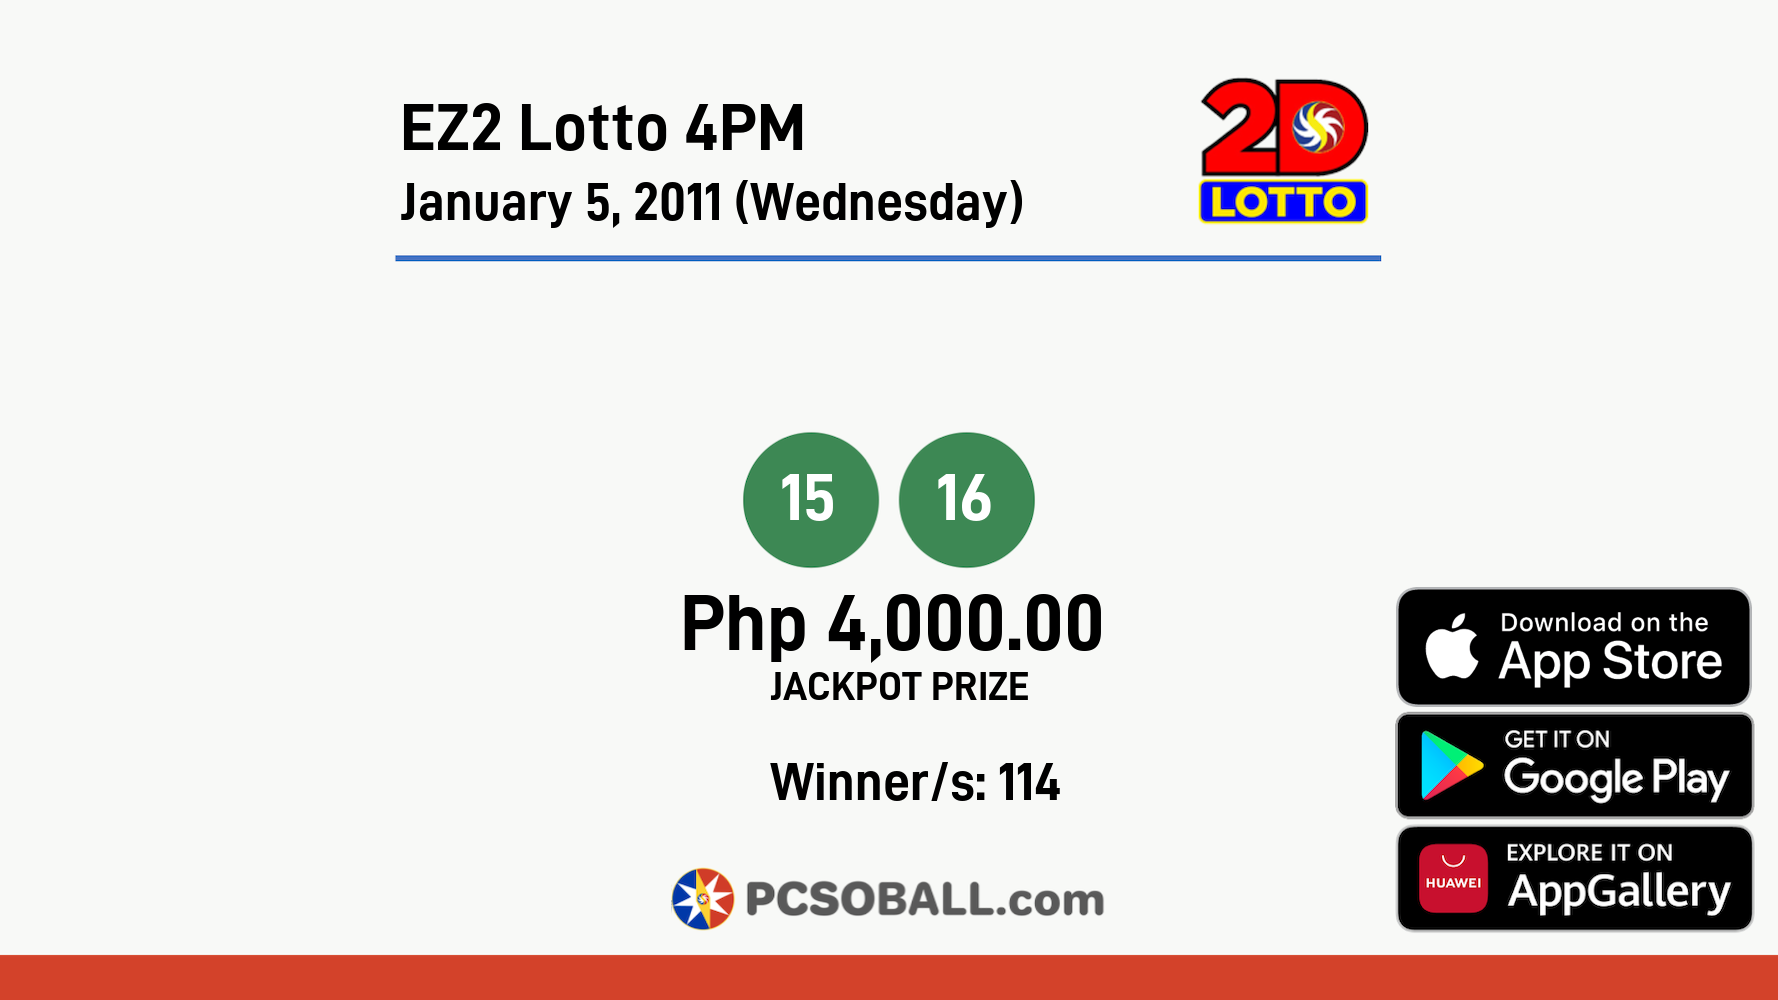 EZ2 Lotto 4PM January 5, 2011 (Wednesday) Result